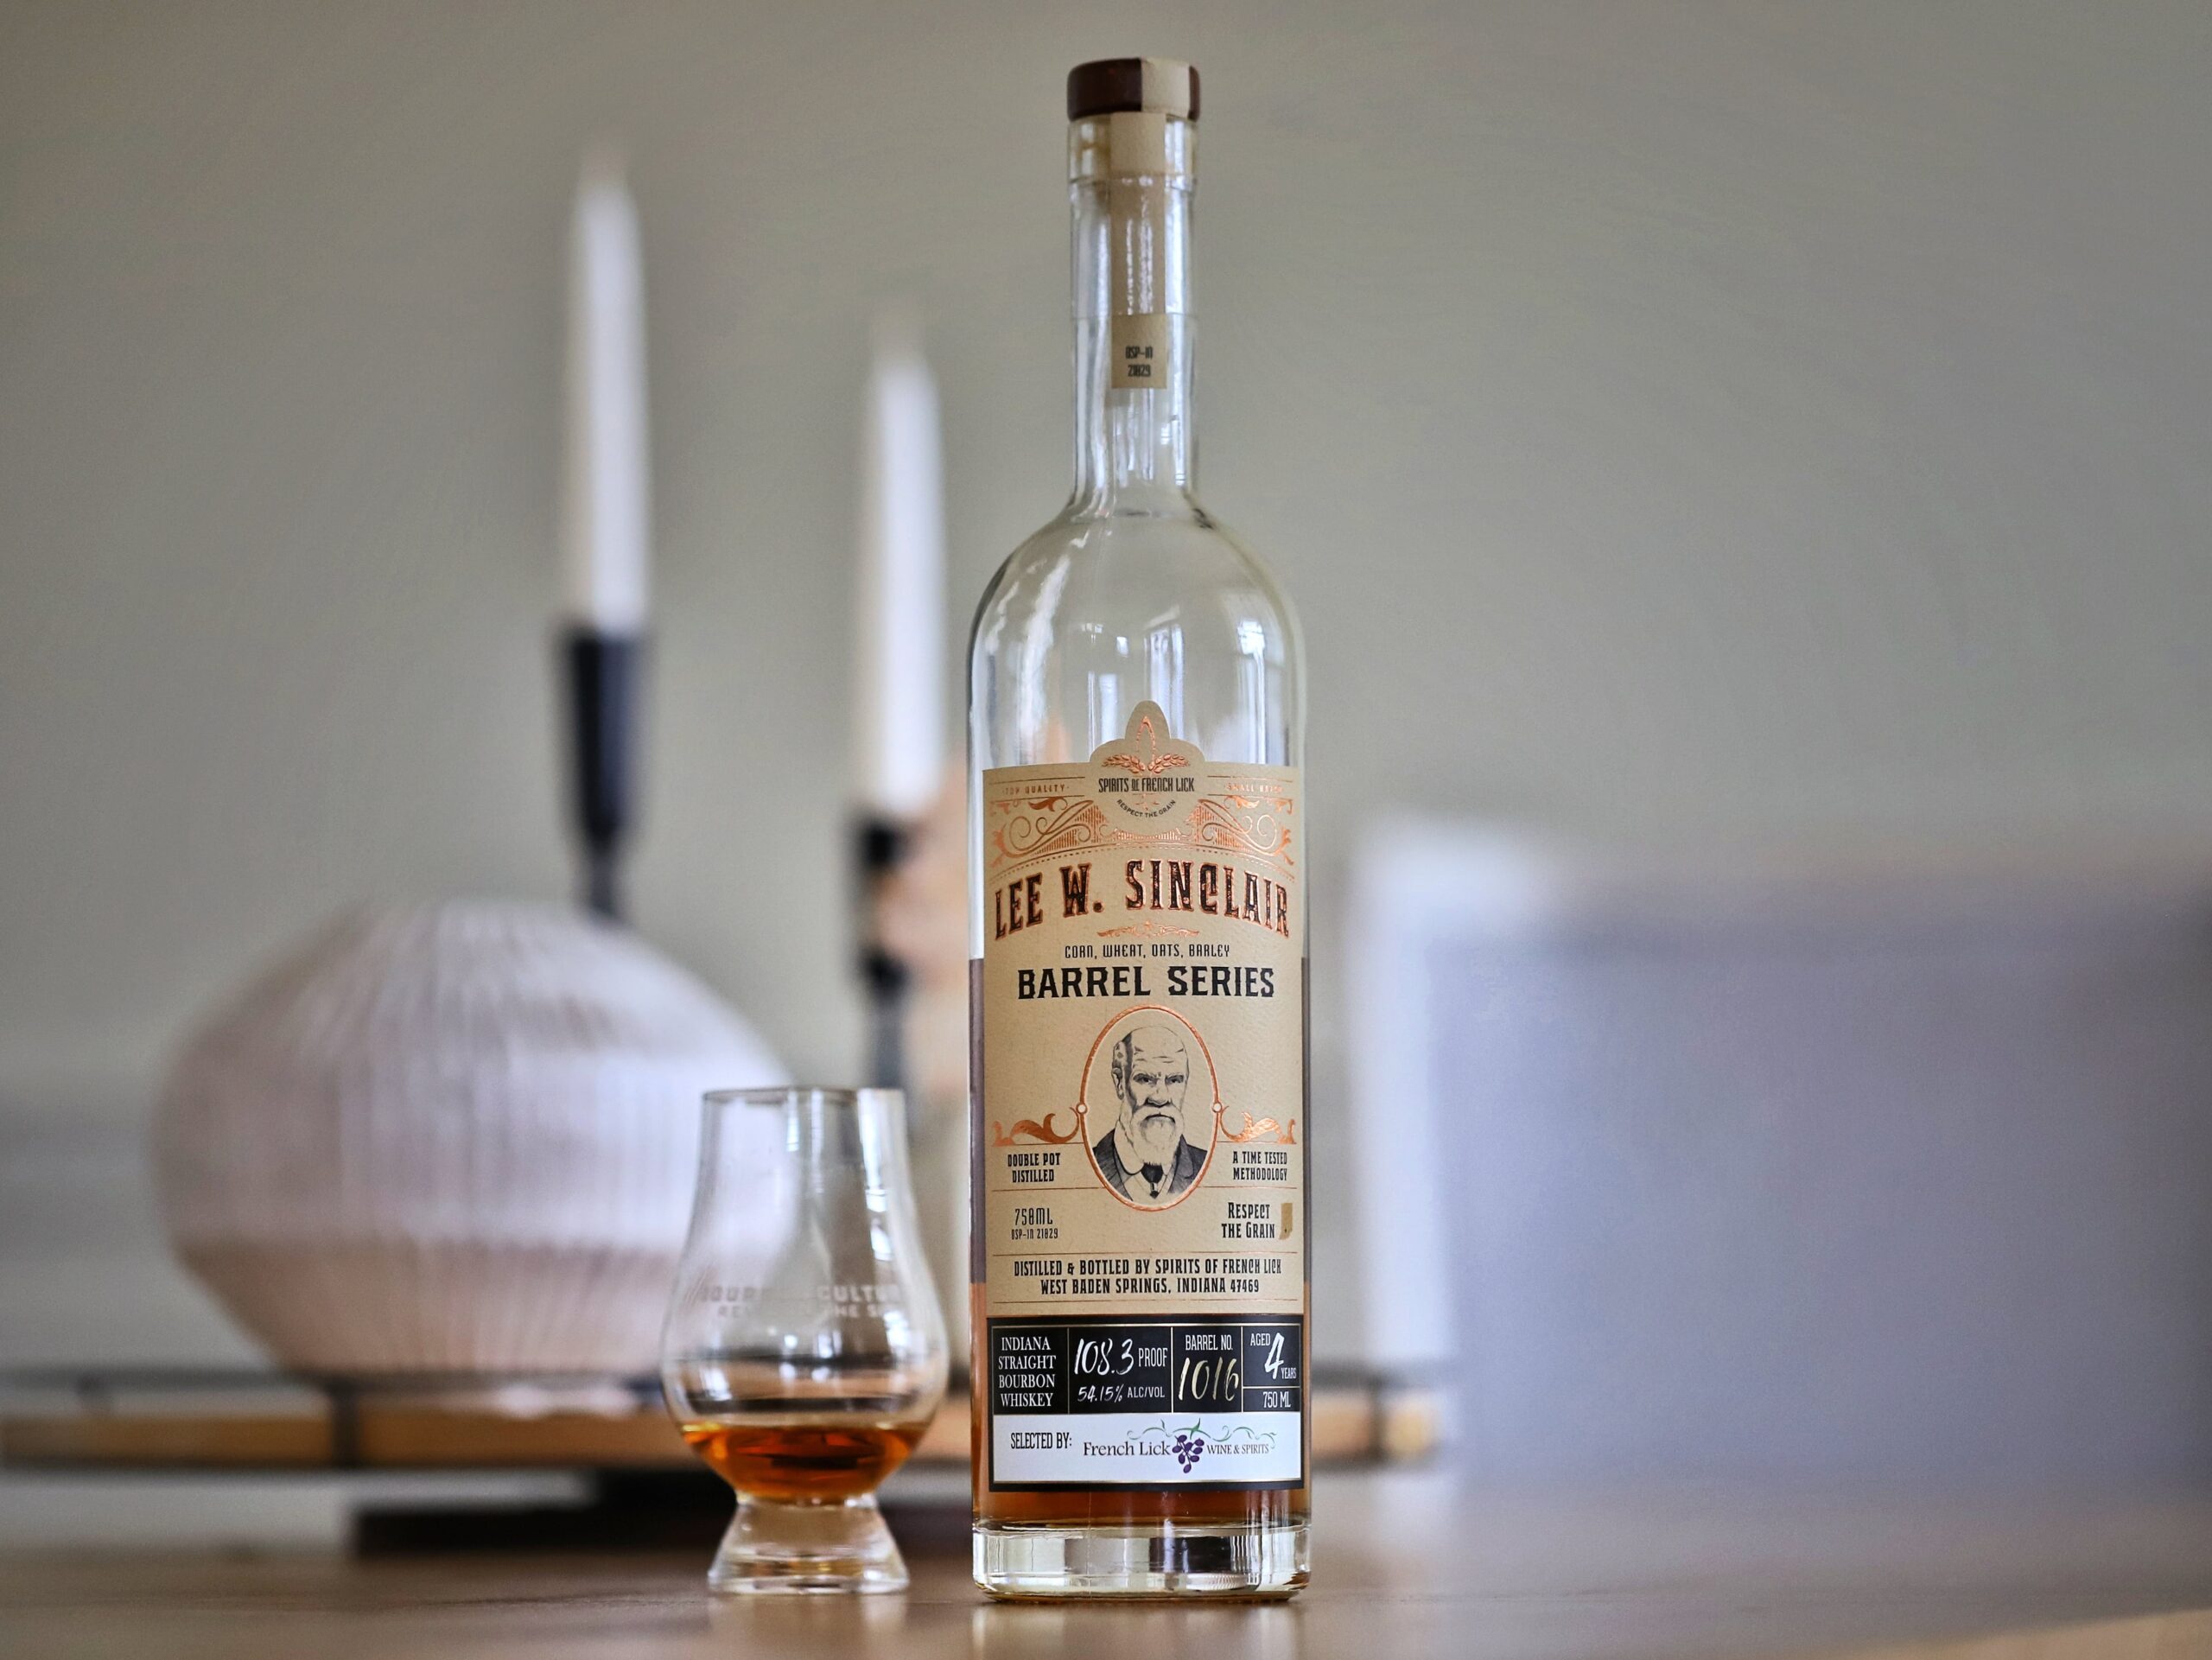 Spirits of French Lick Lee W. Sinclair 4 – Grain Bourbon Review